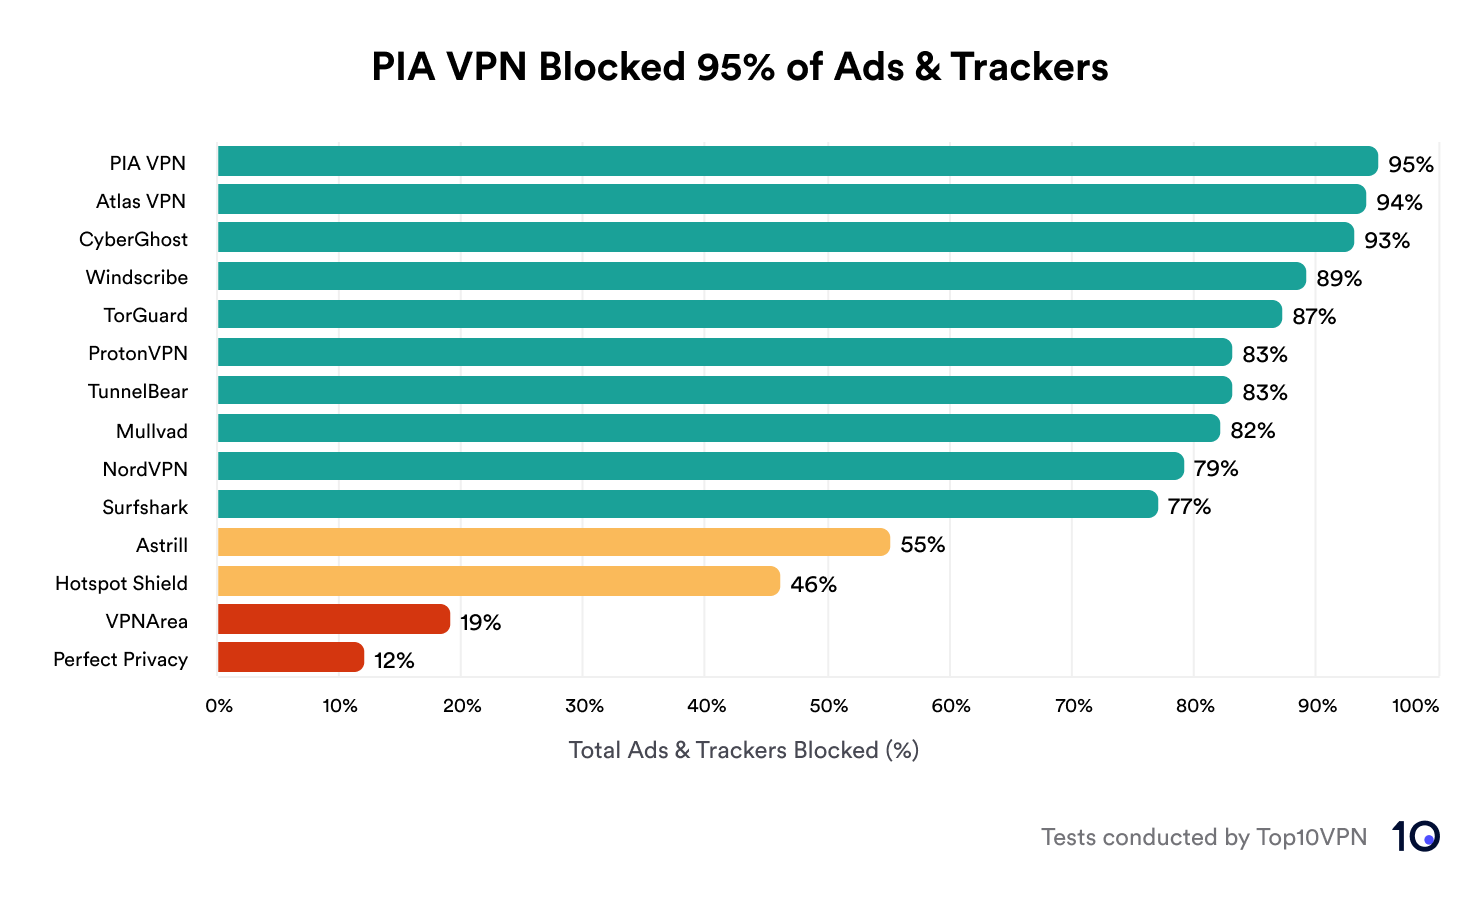 PIA Unblocked 95% of Ads & Trackers